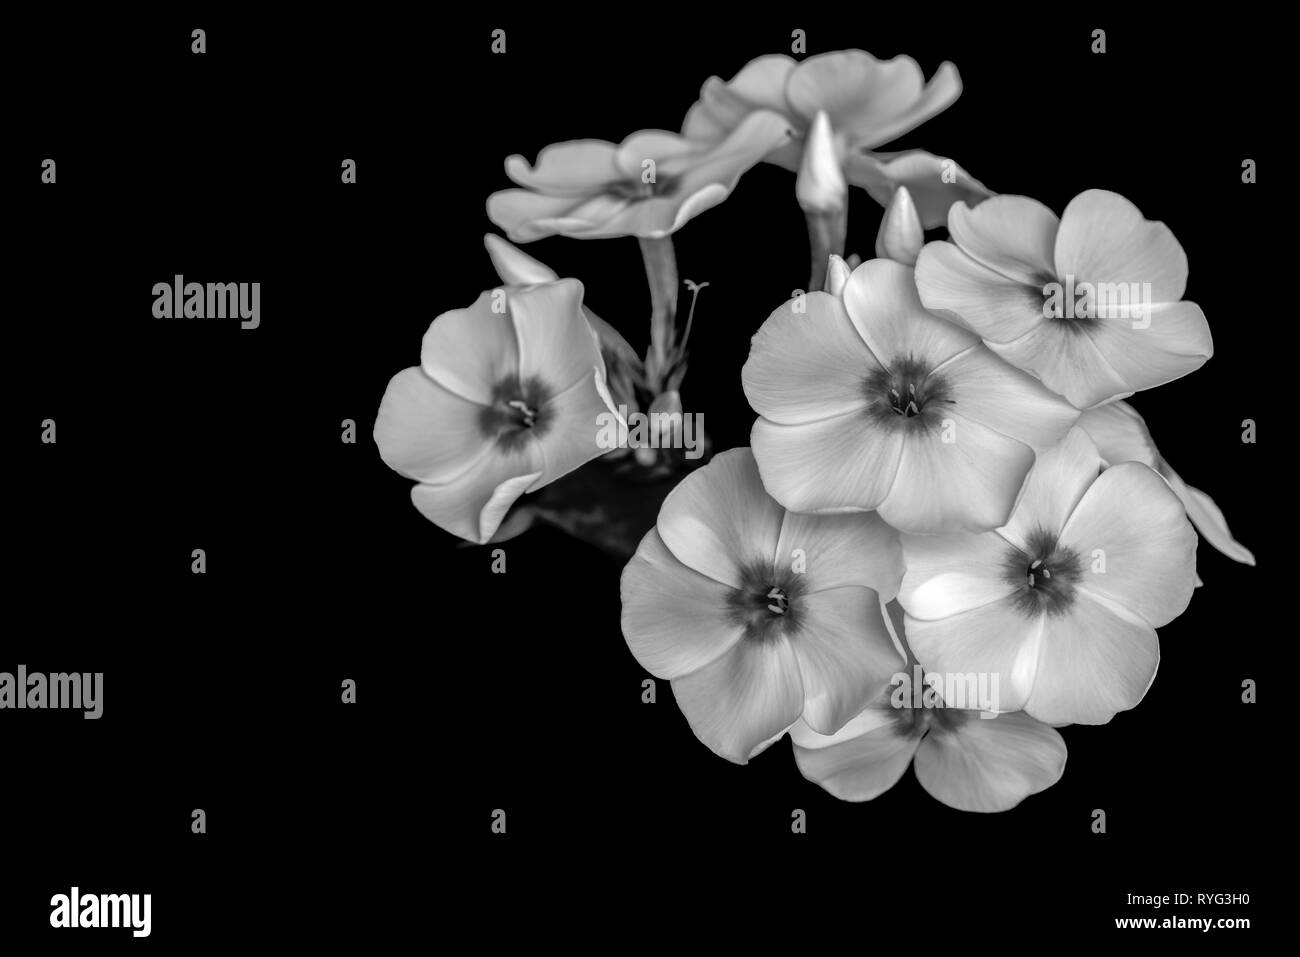 Fine art still life detailed floral monochrome macro photography of a single isolated stem of phlox blossoms,buds,black background, vintage painting Stock Photo